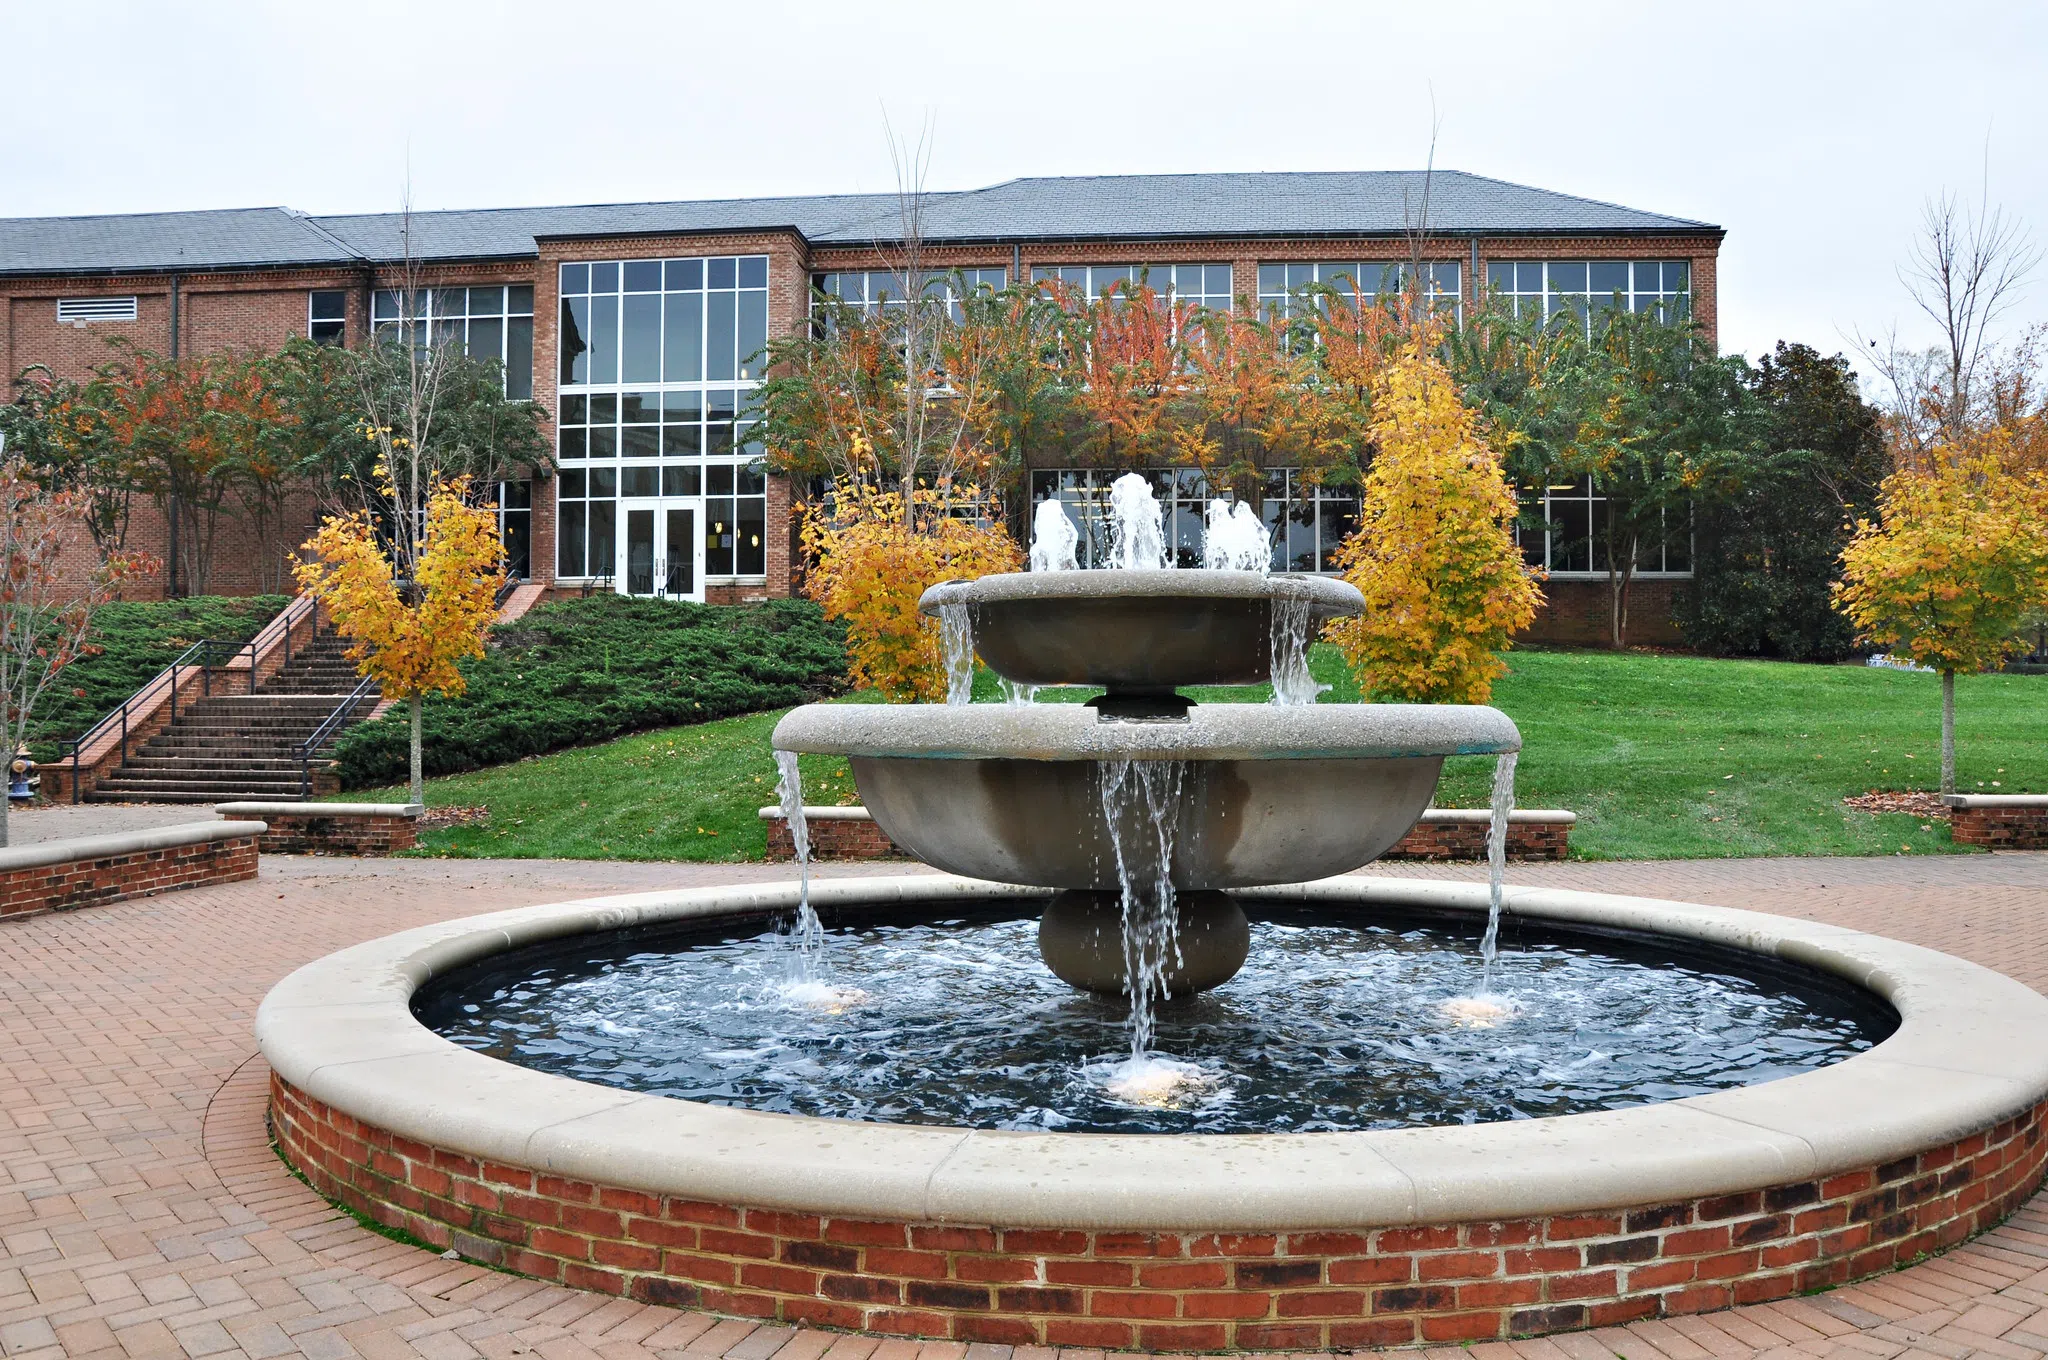 A two-tiered bronze fountain spills into a brick pool in the foreground of a two-story, brick and glass building.